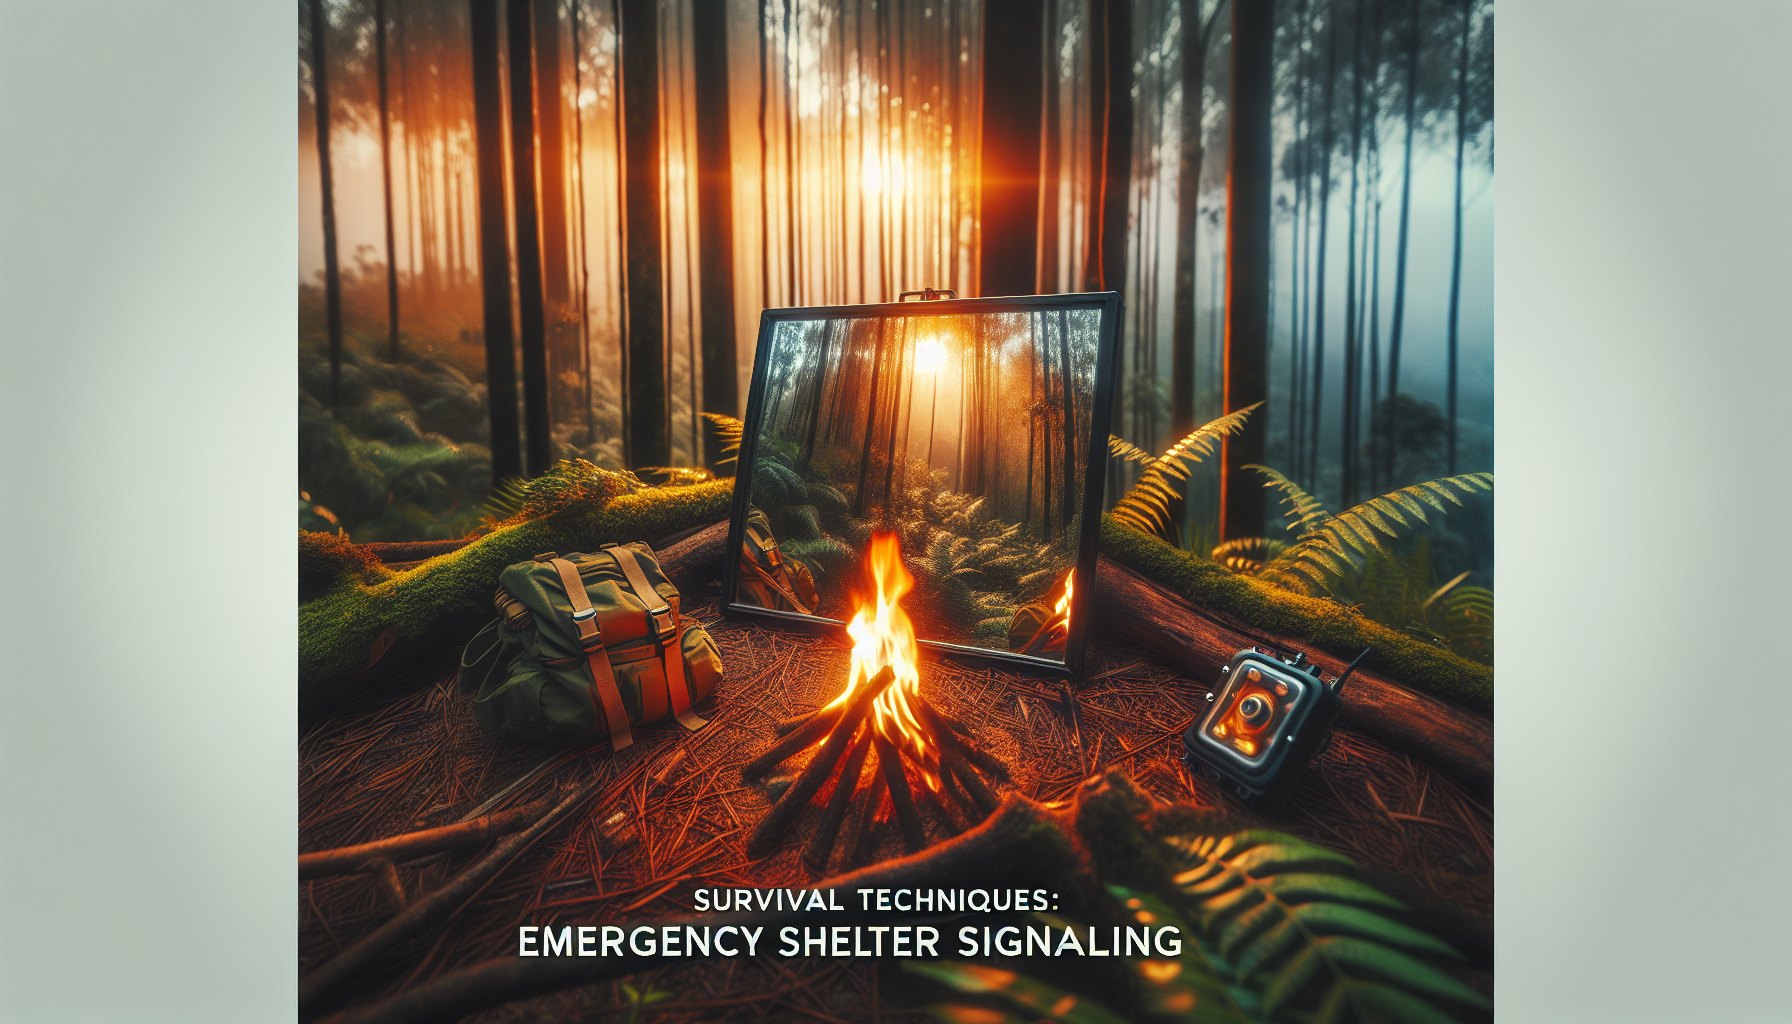 Survival Techniques: Emergency Shelter Signaling